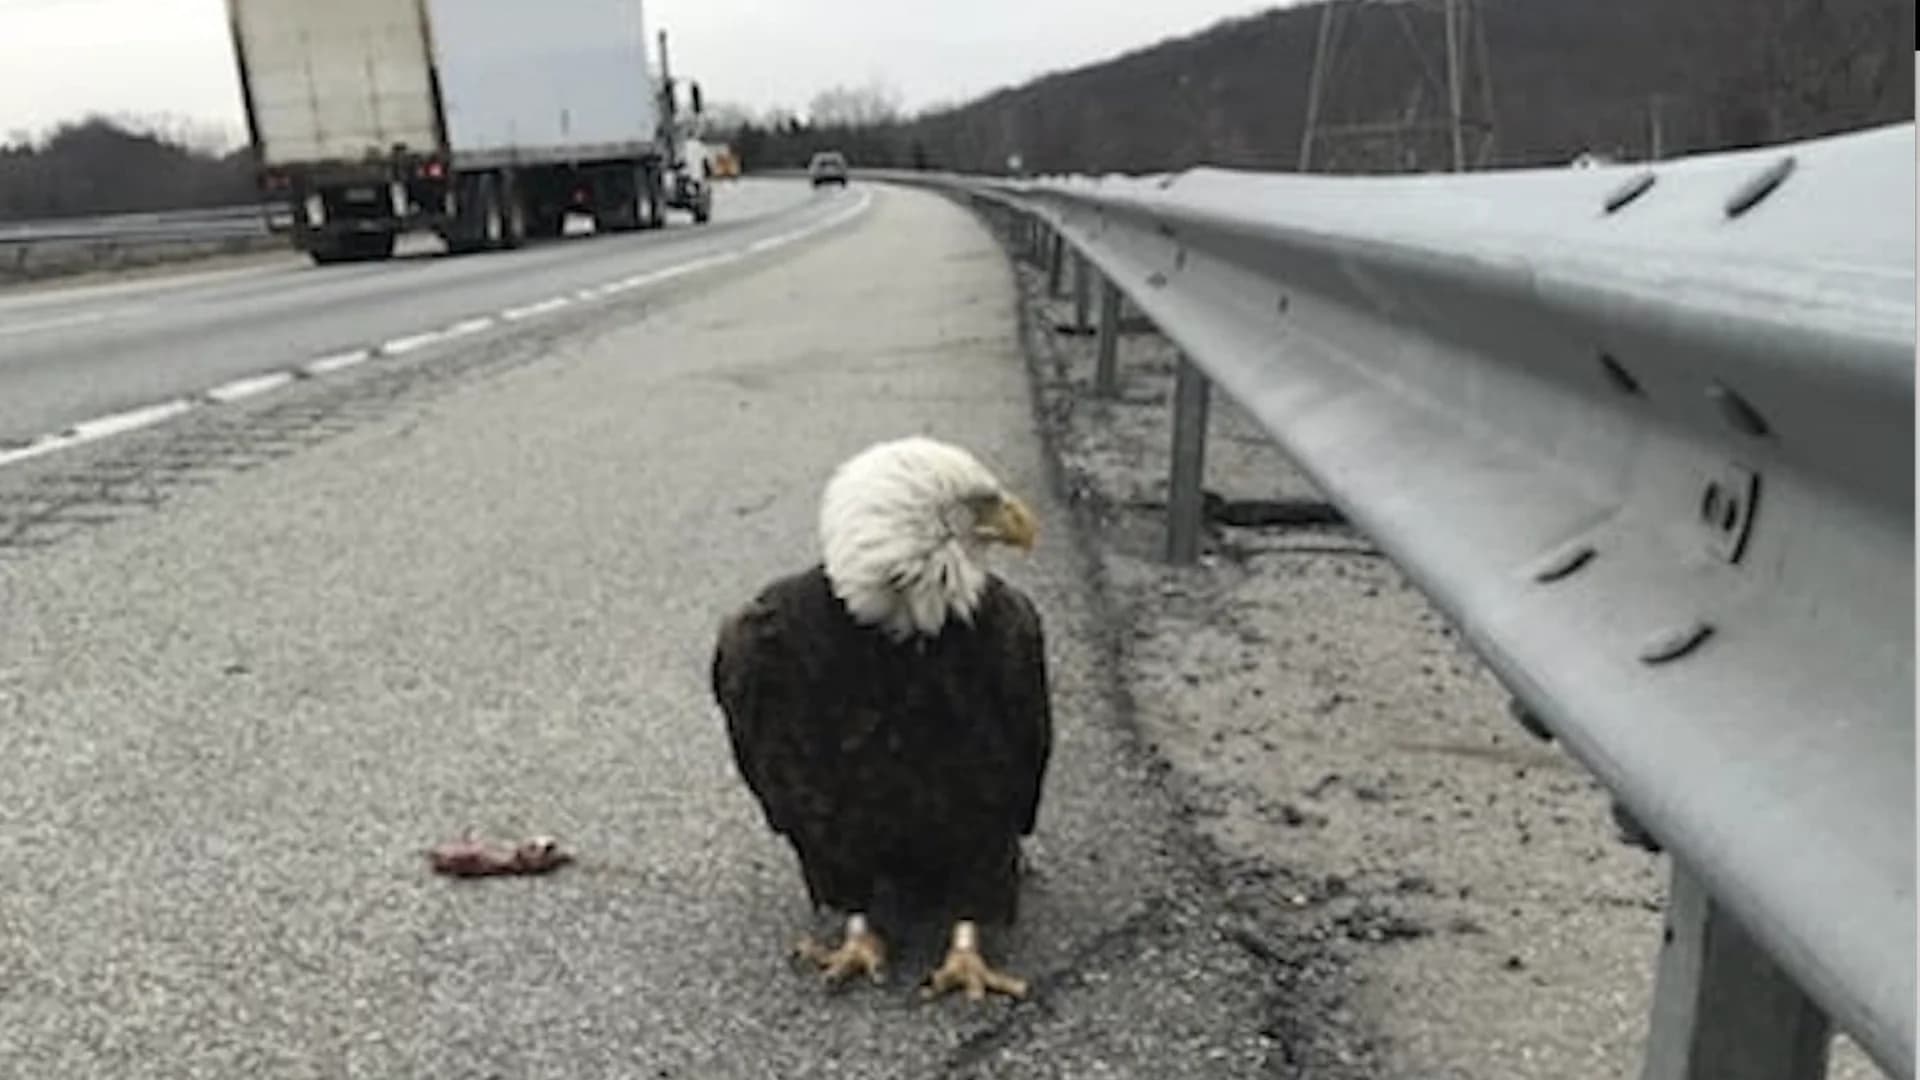 State trooper rescues injured bald eagle in Blooming Grove